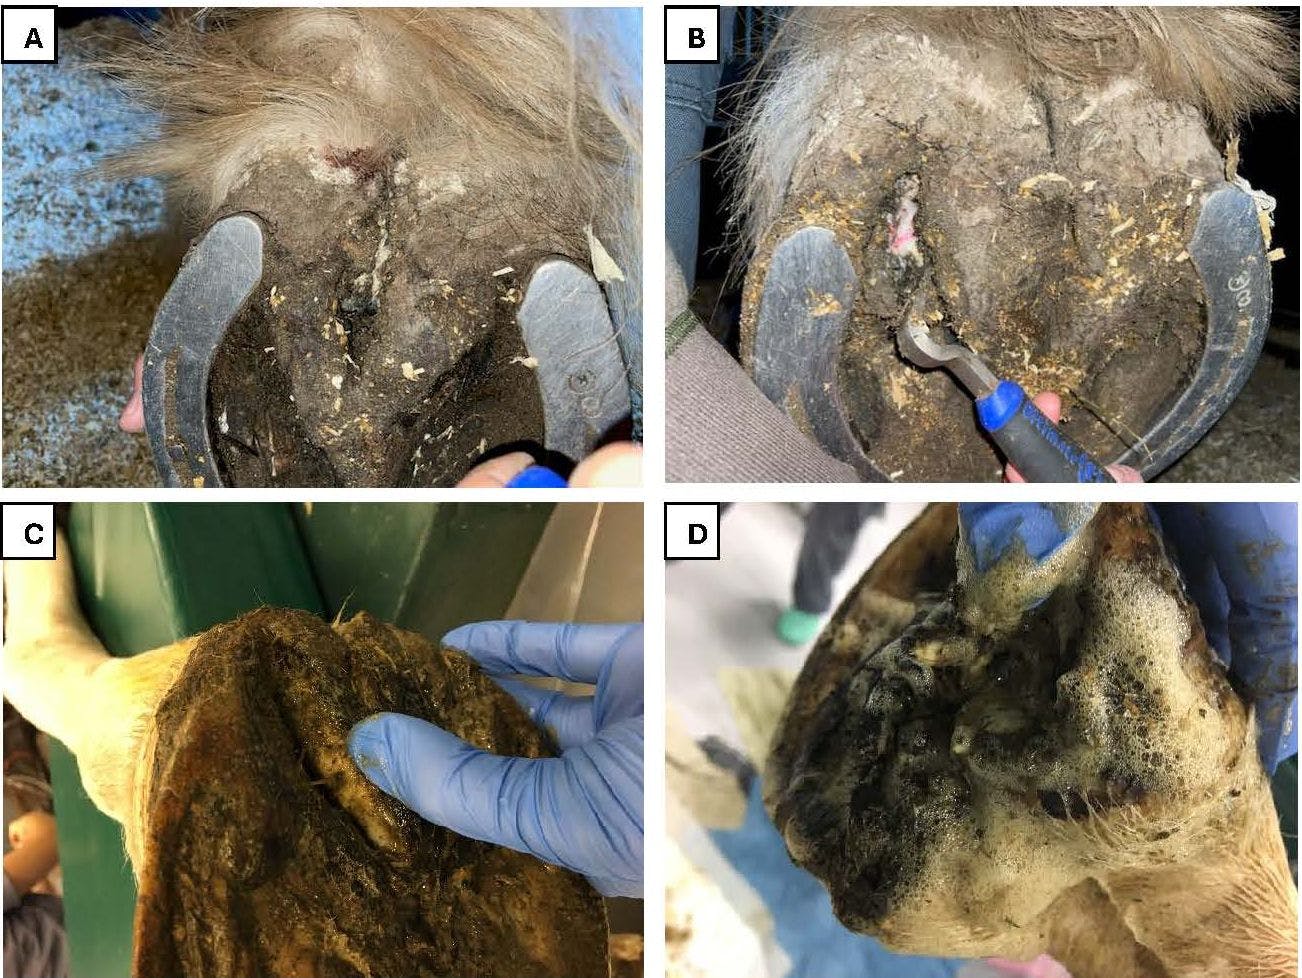 Figure 1. Examples of canker presentation. A) A draft horse with soft, white, proliferative tissue within the central sulcus of the frog. B) A mix of white to pink soft tissue on the abaxial aspect of the frog. C) A light breed horse with diffuse soft, unkeratinized tissue along the length of the frog, which bled easily with manipulation. D) The same hoof as depicted in C; however, after cleaning, white frond-like tissue could be appreciated within the central sulcus of the frog as well.